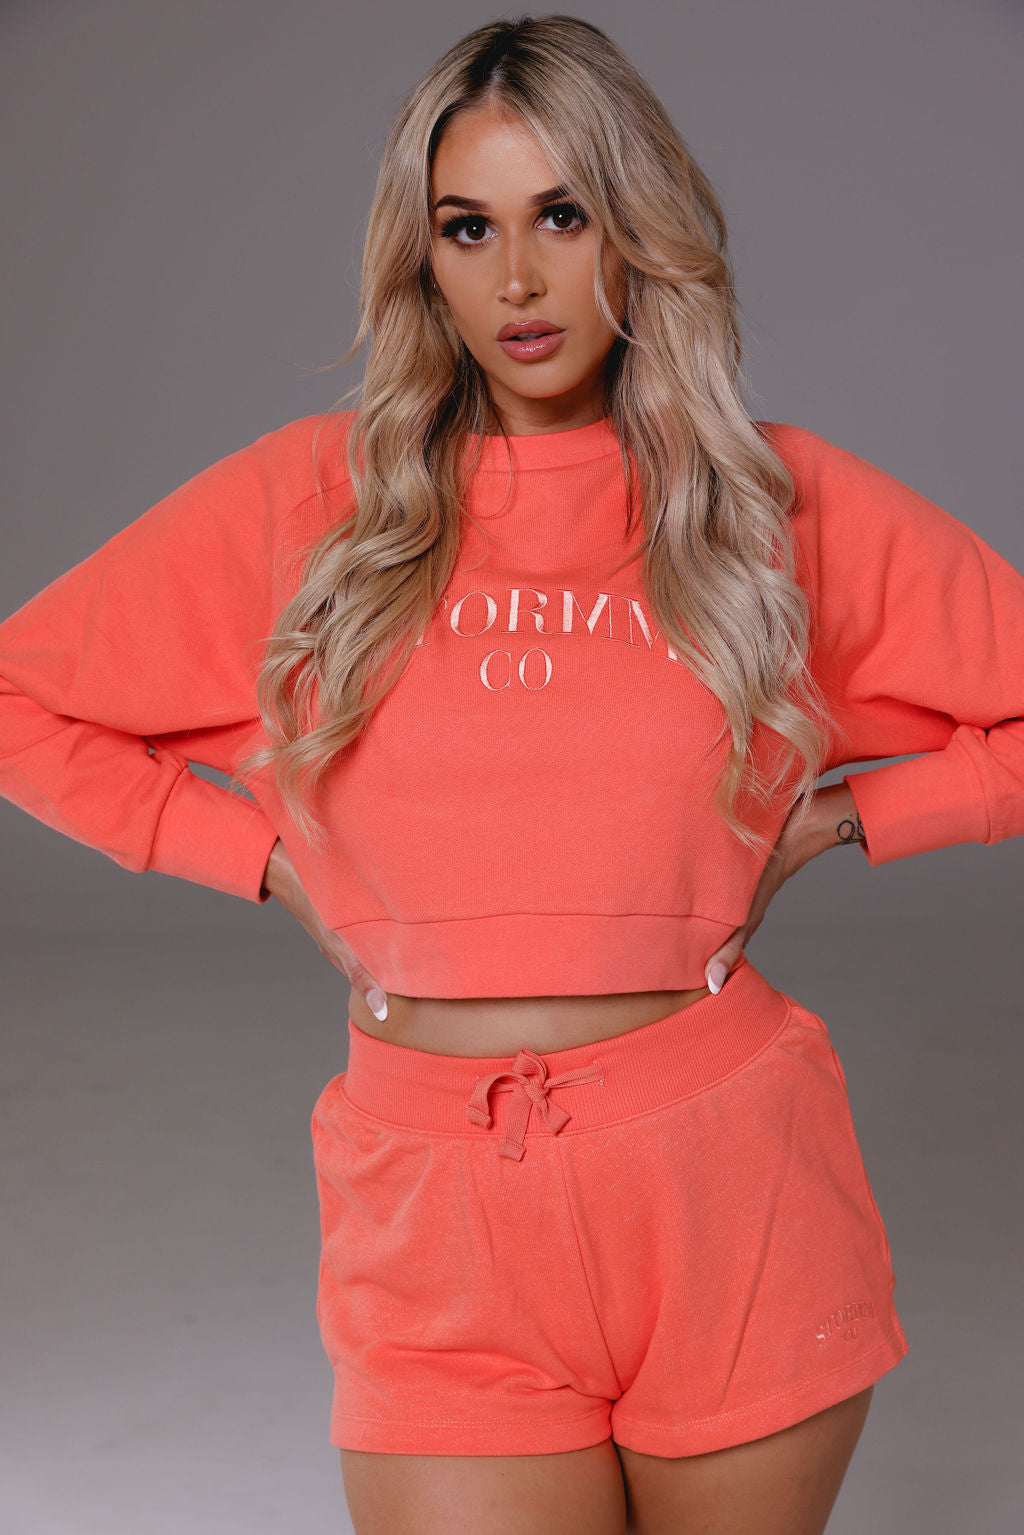 Cropped jumper in coral from Stormm Co's Hues of Happiness collection, made from soft French terry cotton, relaxed fit, and embroidered unique design.